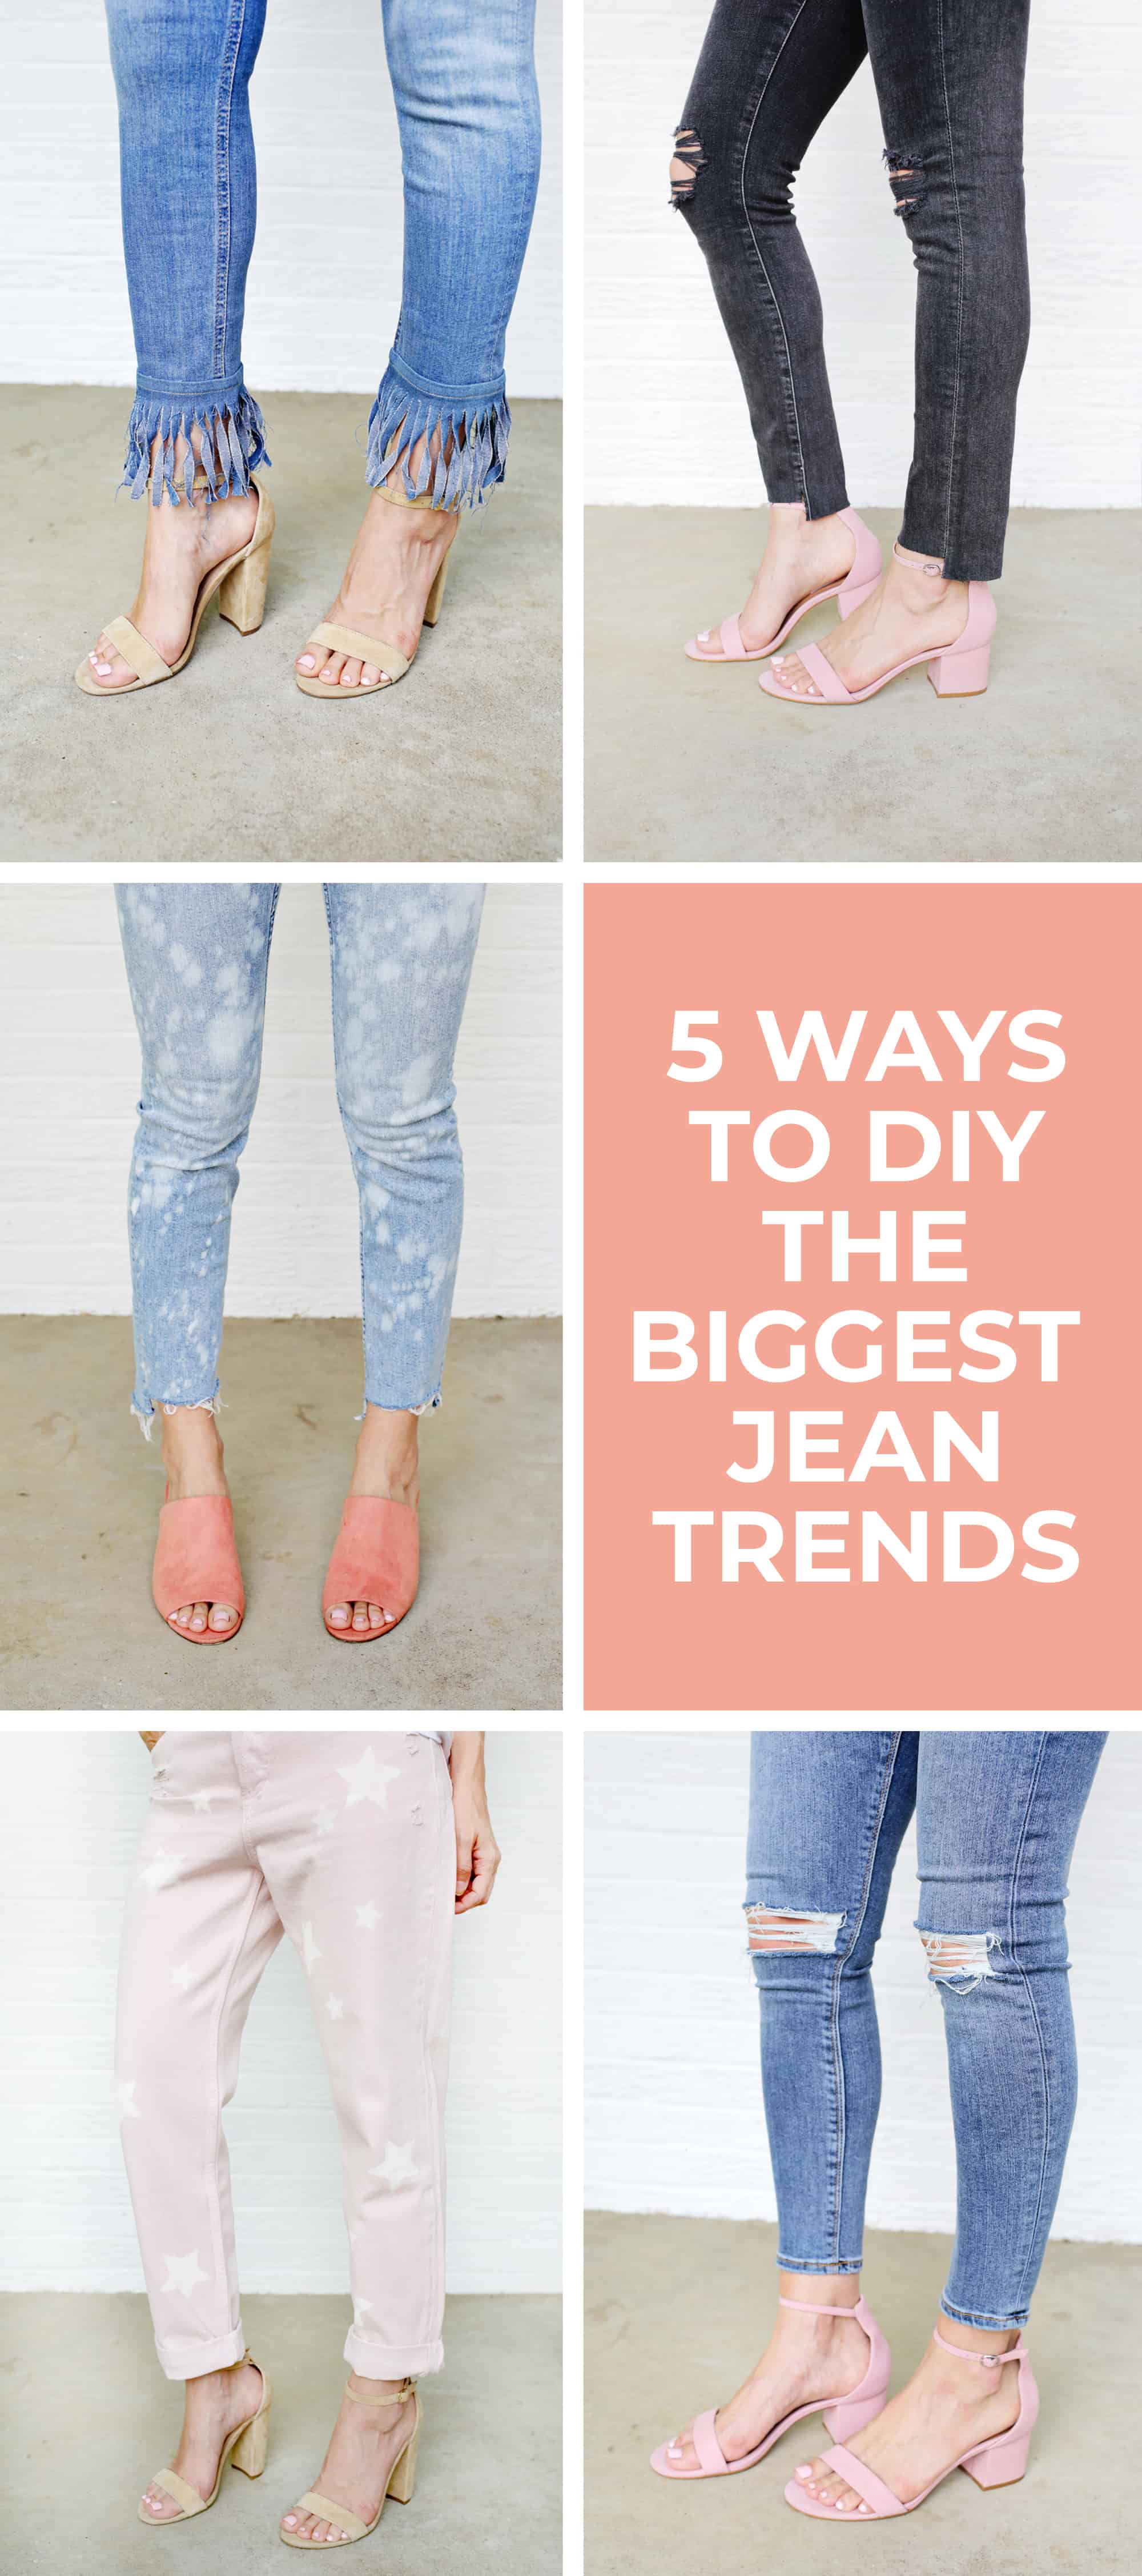 Lydig grå ide 5 Ways to DIY The Biggest Jean Trends! - A Beautiful Mess